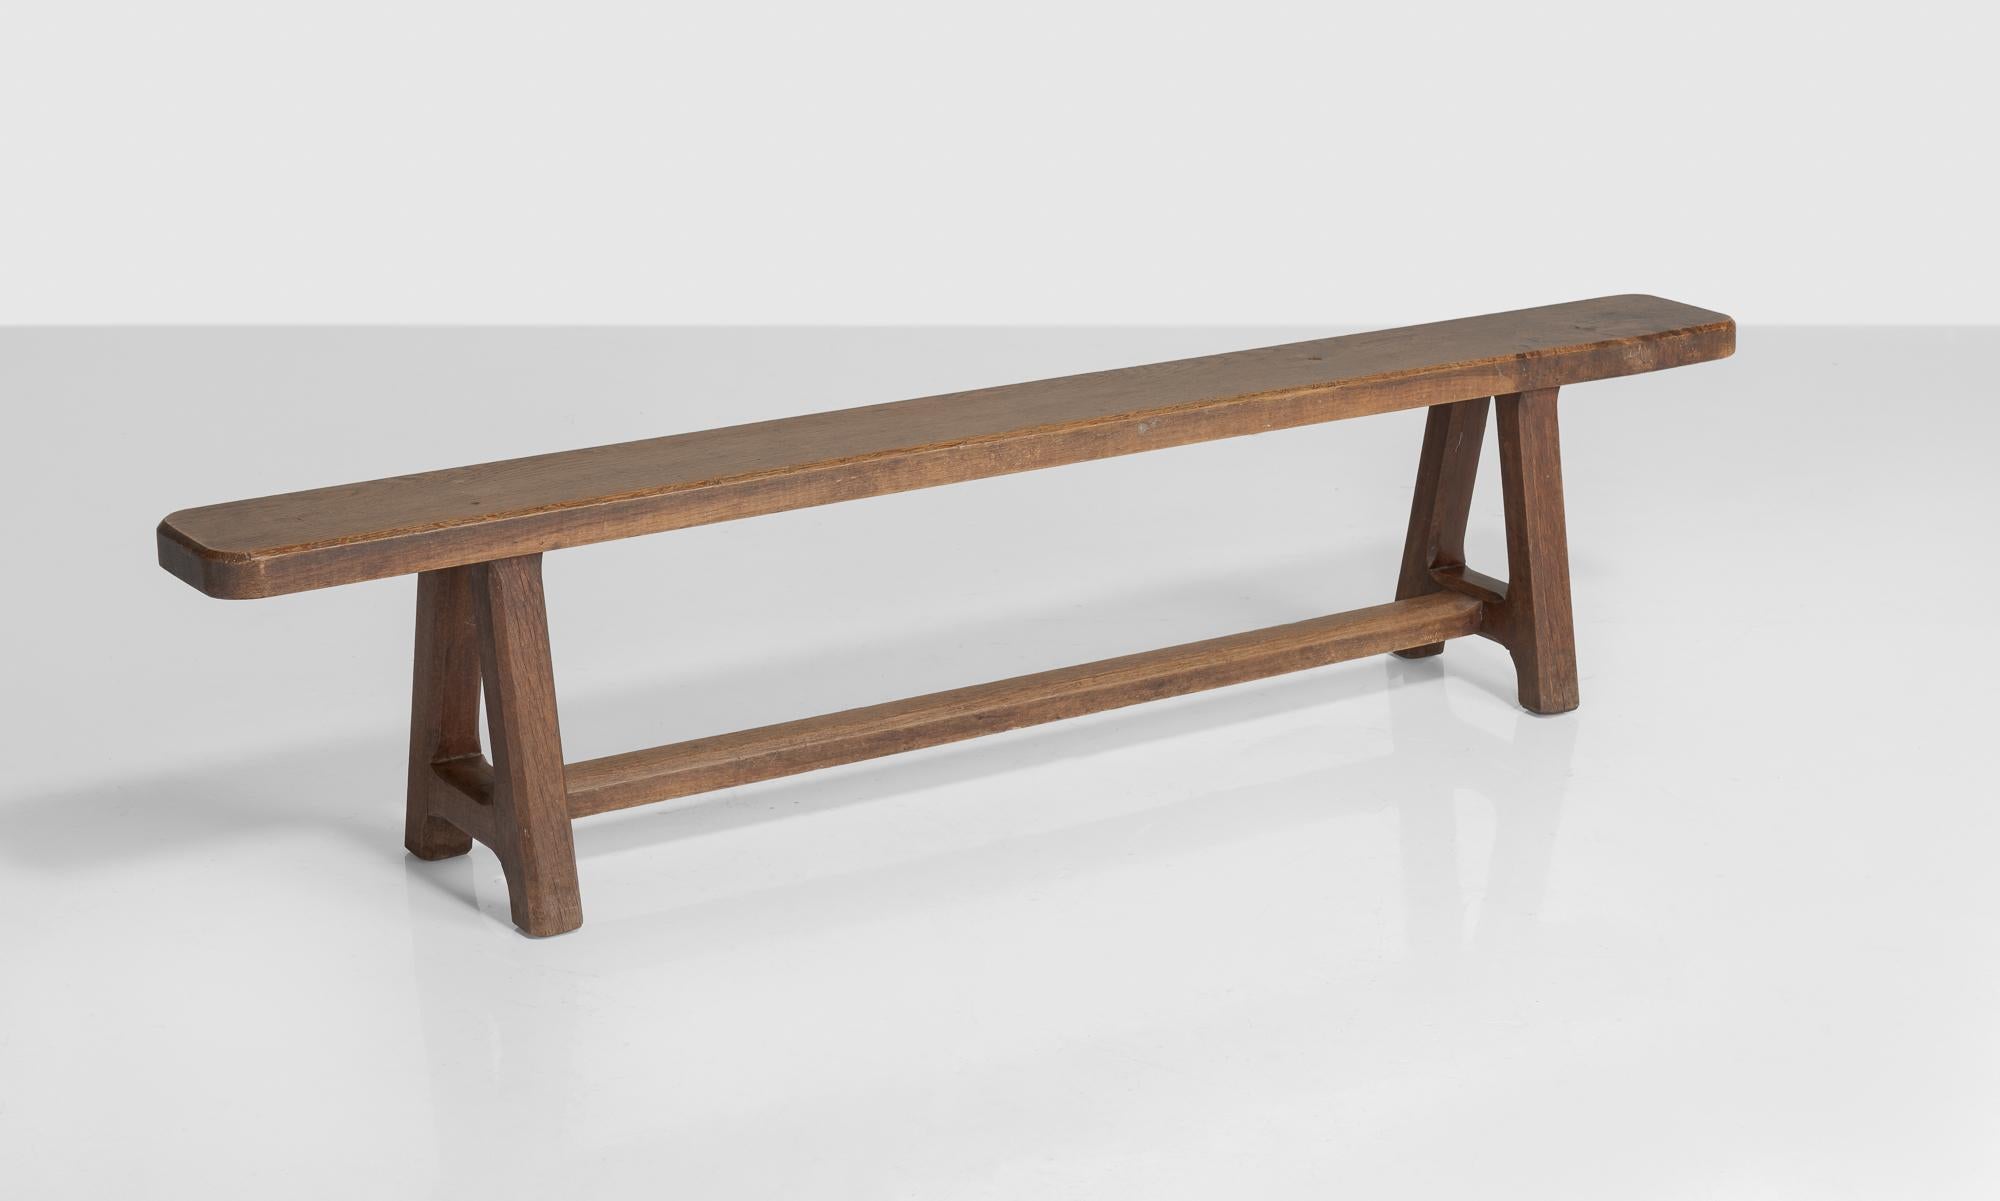 Solid oak bench, England, circa 1850

Thick oak seat on square, chambered legs that are joined by an H-stretcher.